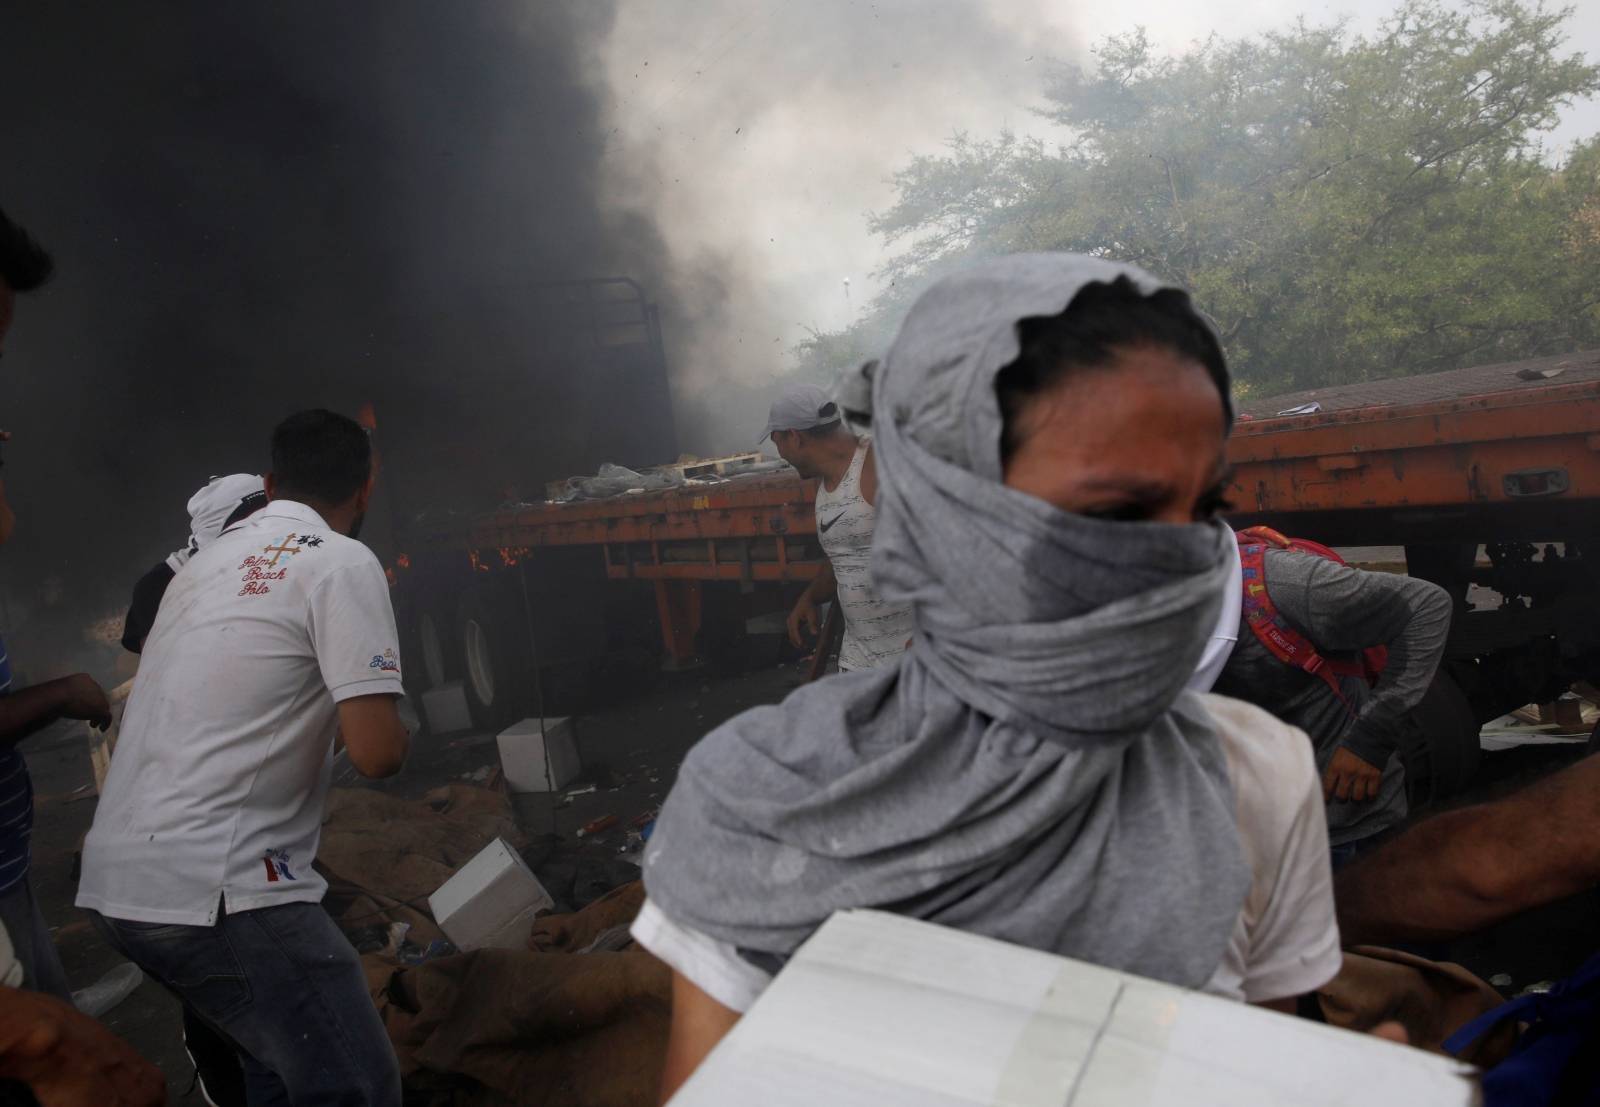 Truck that was carrying humanitarian aid for Venezuela is seen on fire in Cucuta